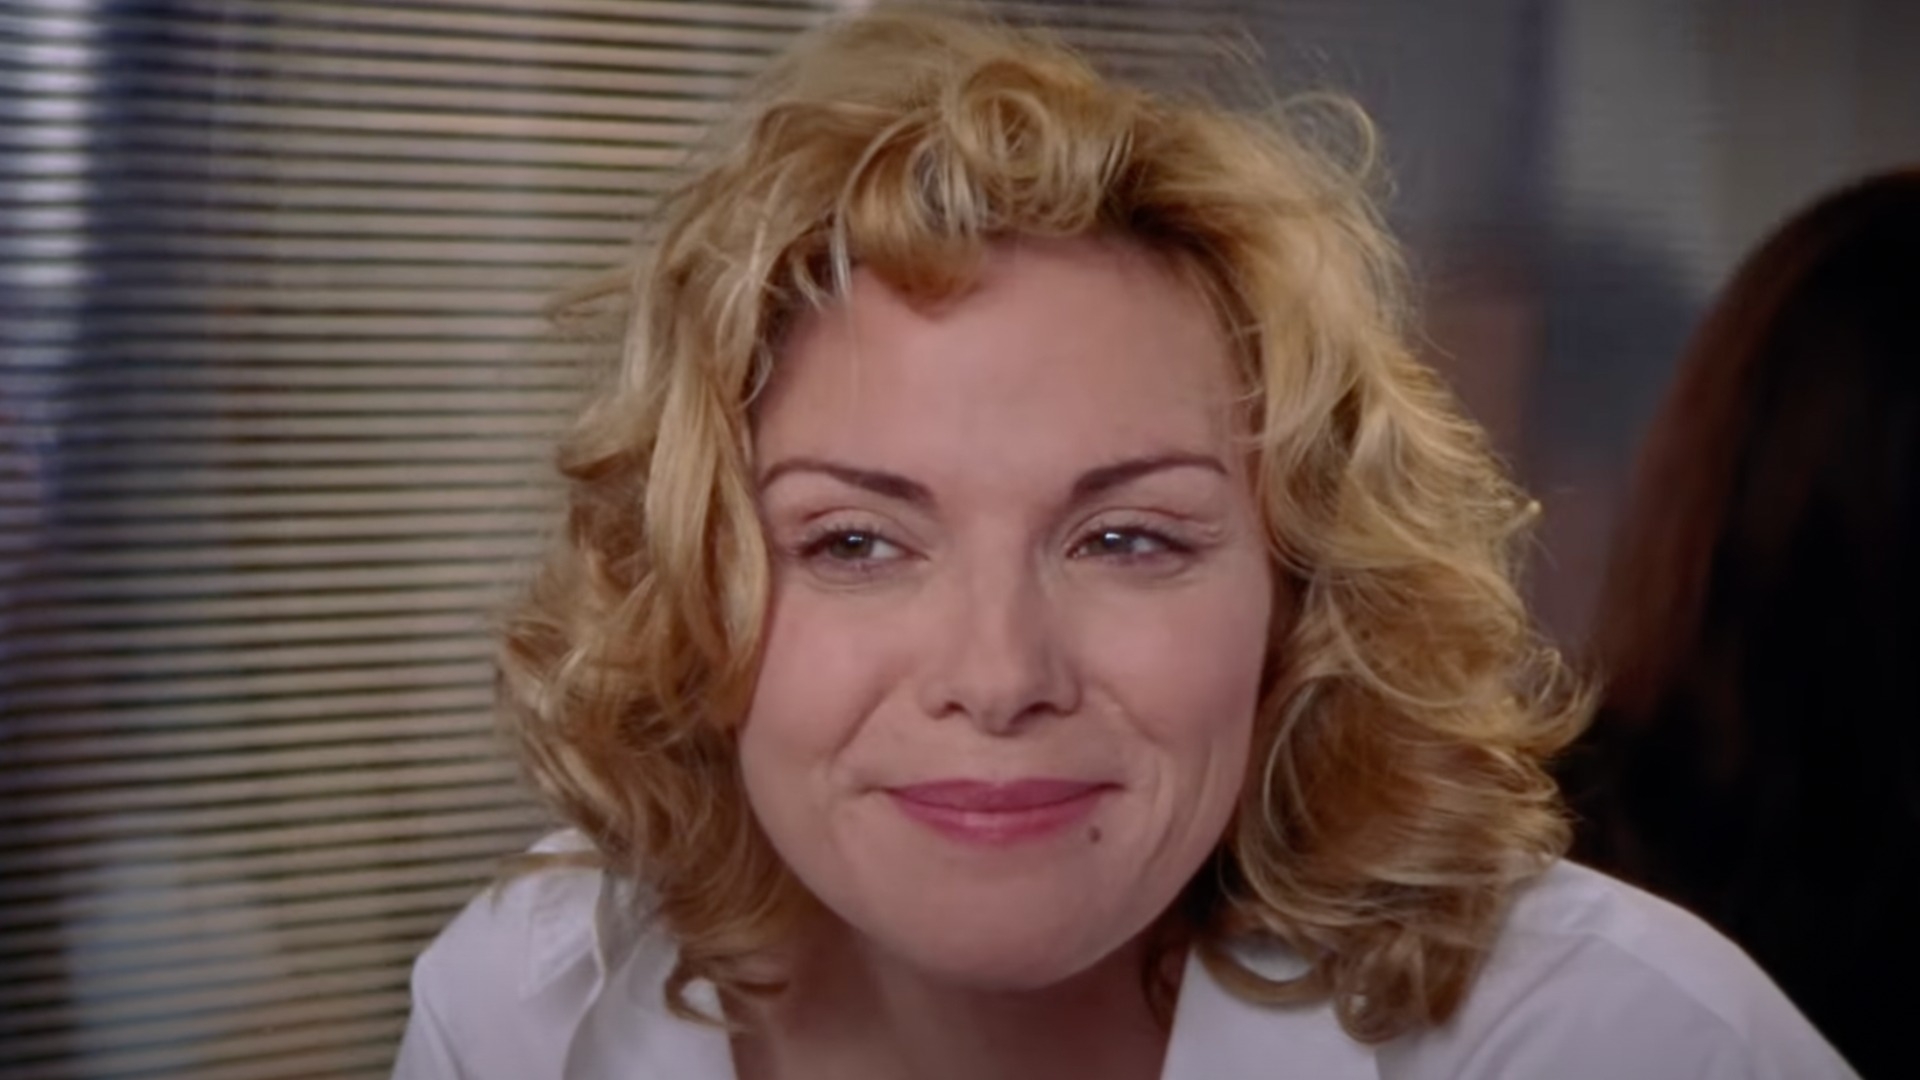 Samantha will be back for the second season of And Just Like That… but Kim Cattrall won’t